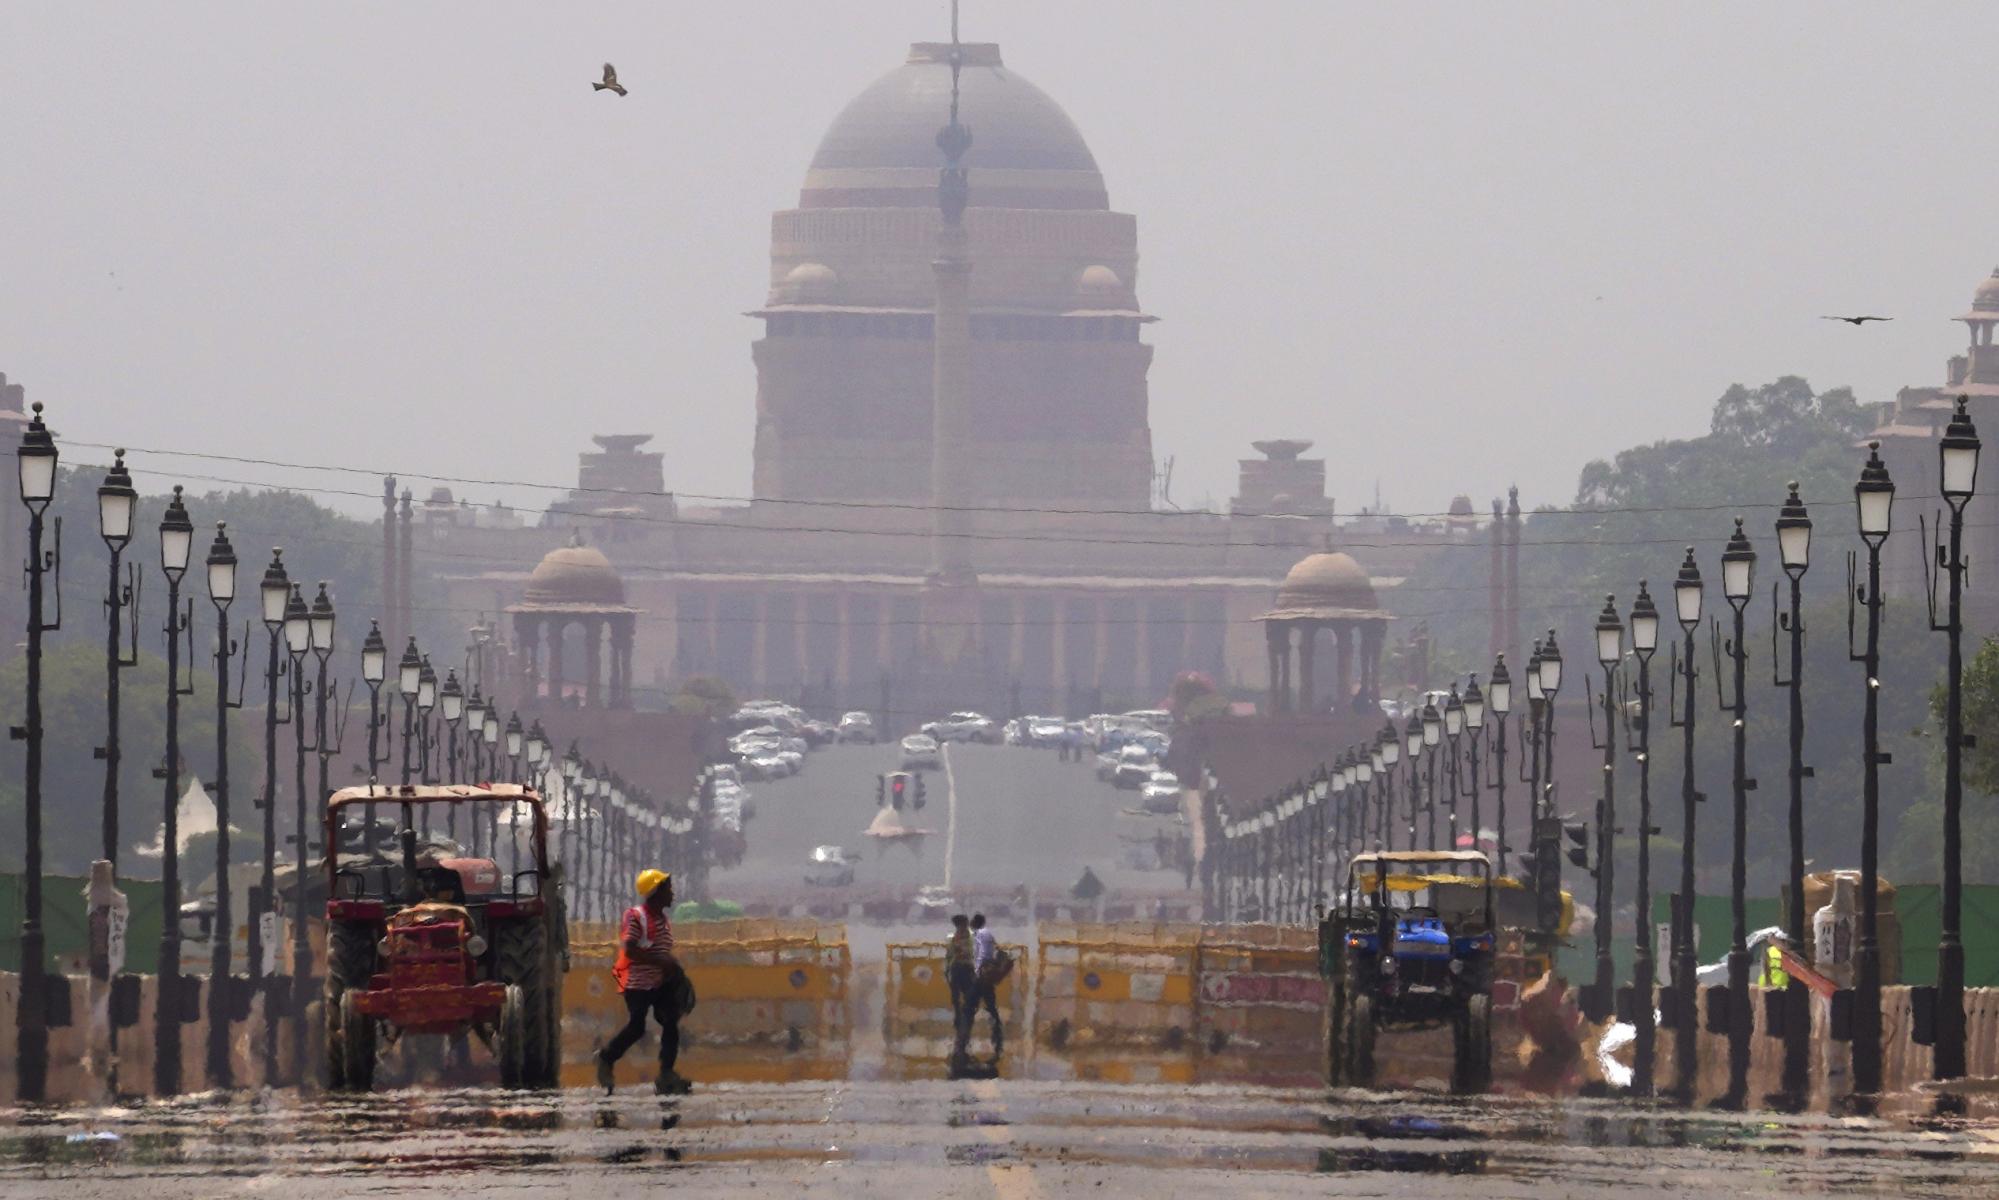 ‘In Delhi I can see climate catastrophe unfolding before my eyes’